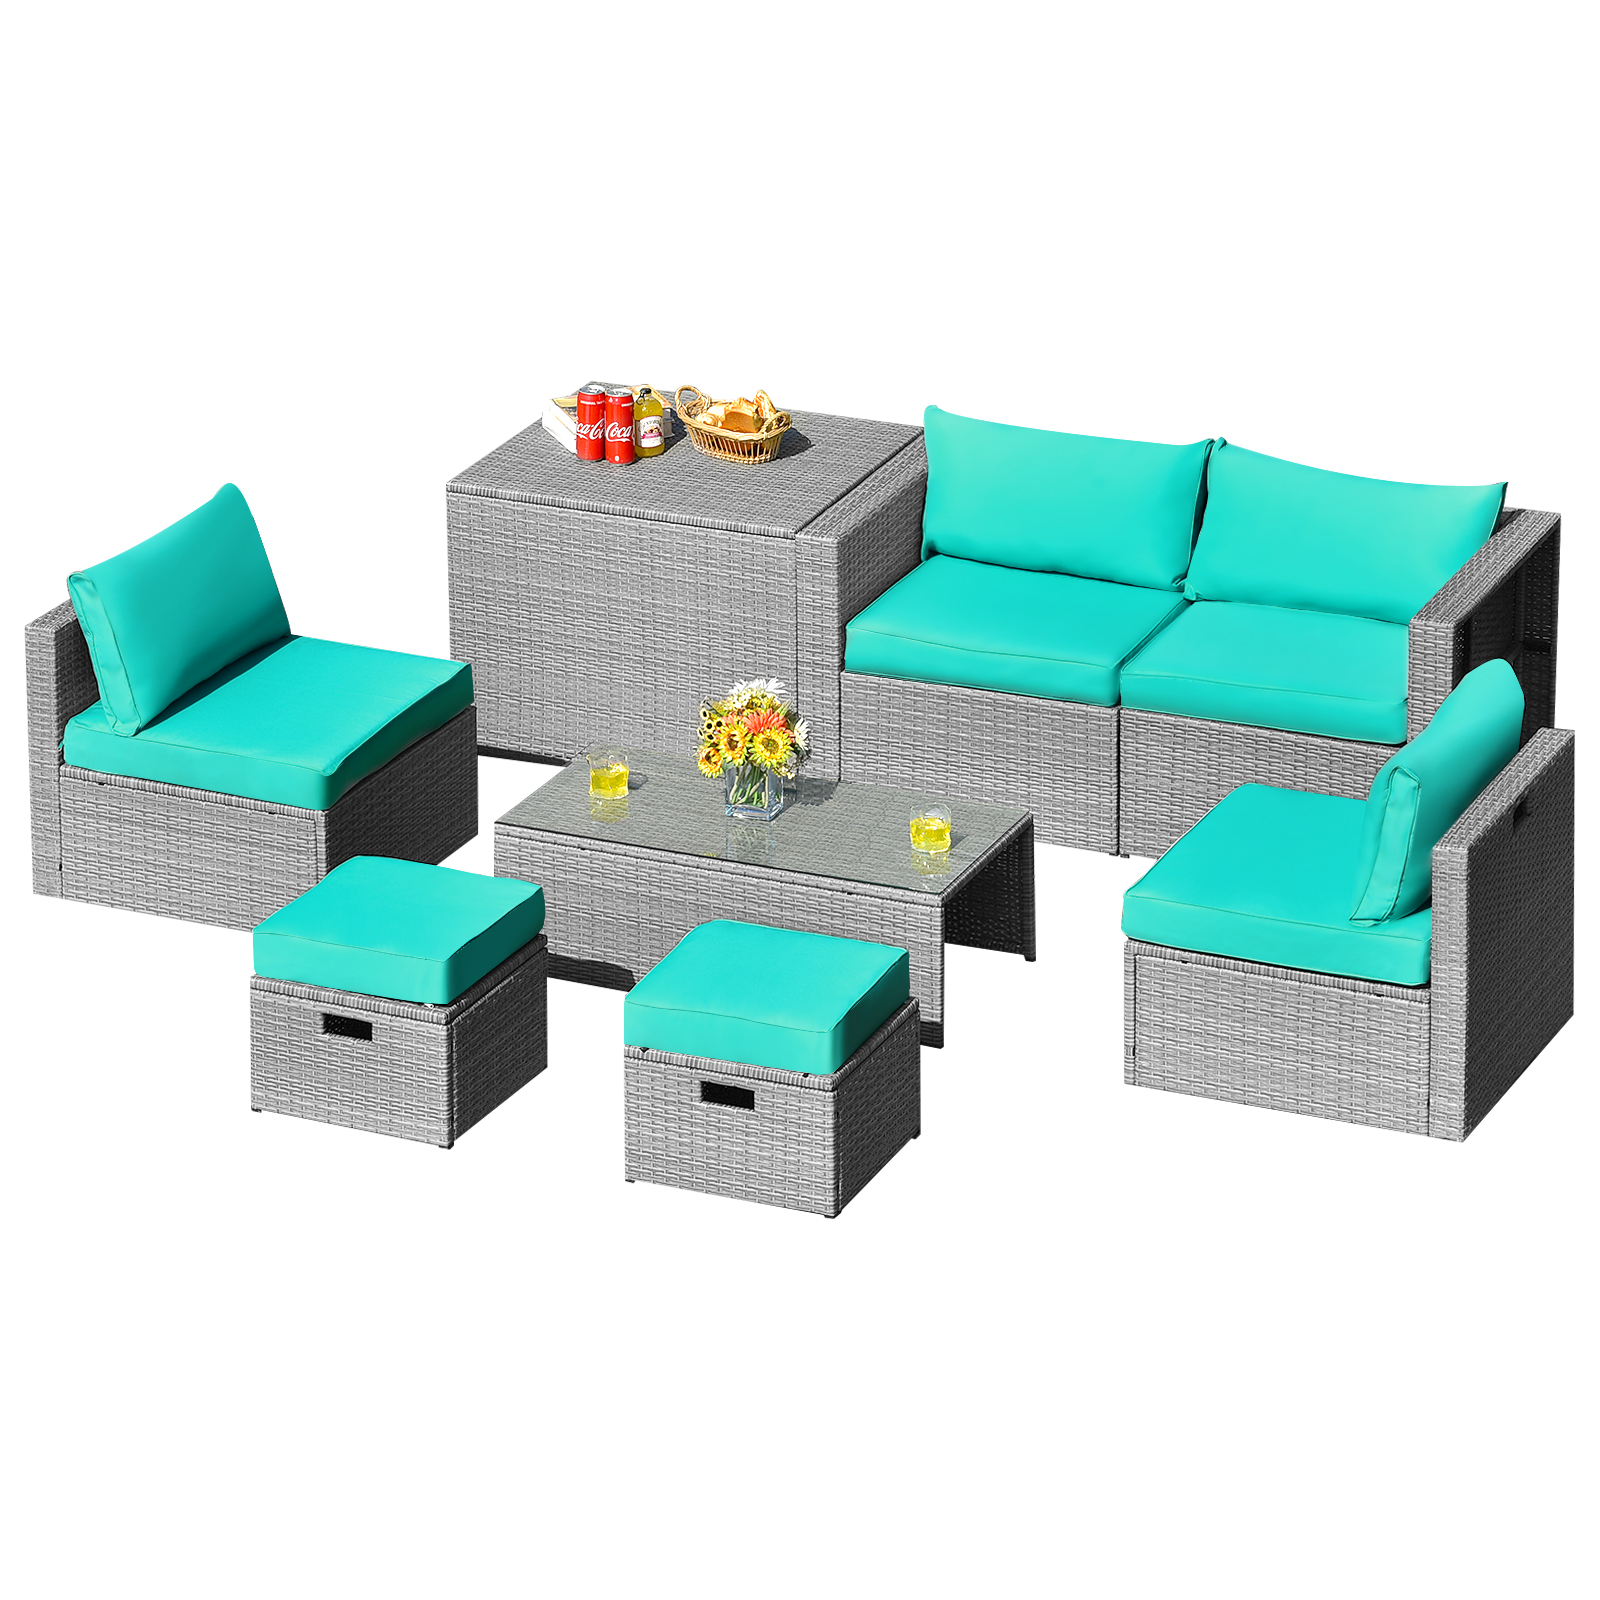 Patiojoy 8 Pieces All-Weather PE Rattan Patio Furniture Set Outdoor Space-Saving Sectional Sofa Set with Storage Box Turquoise - image 1 of 9